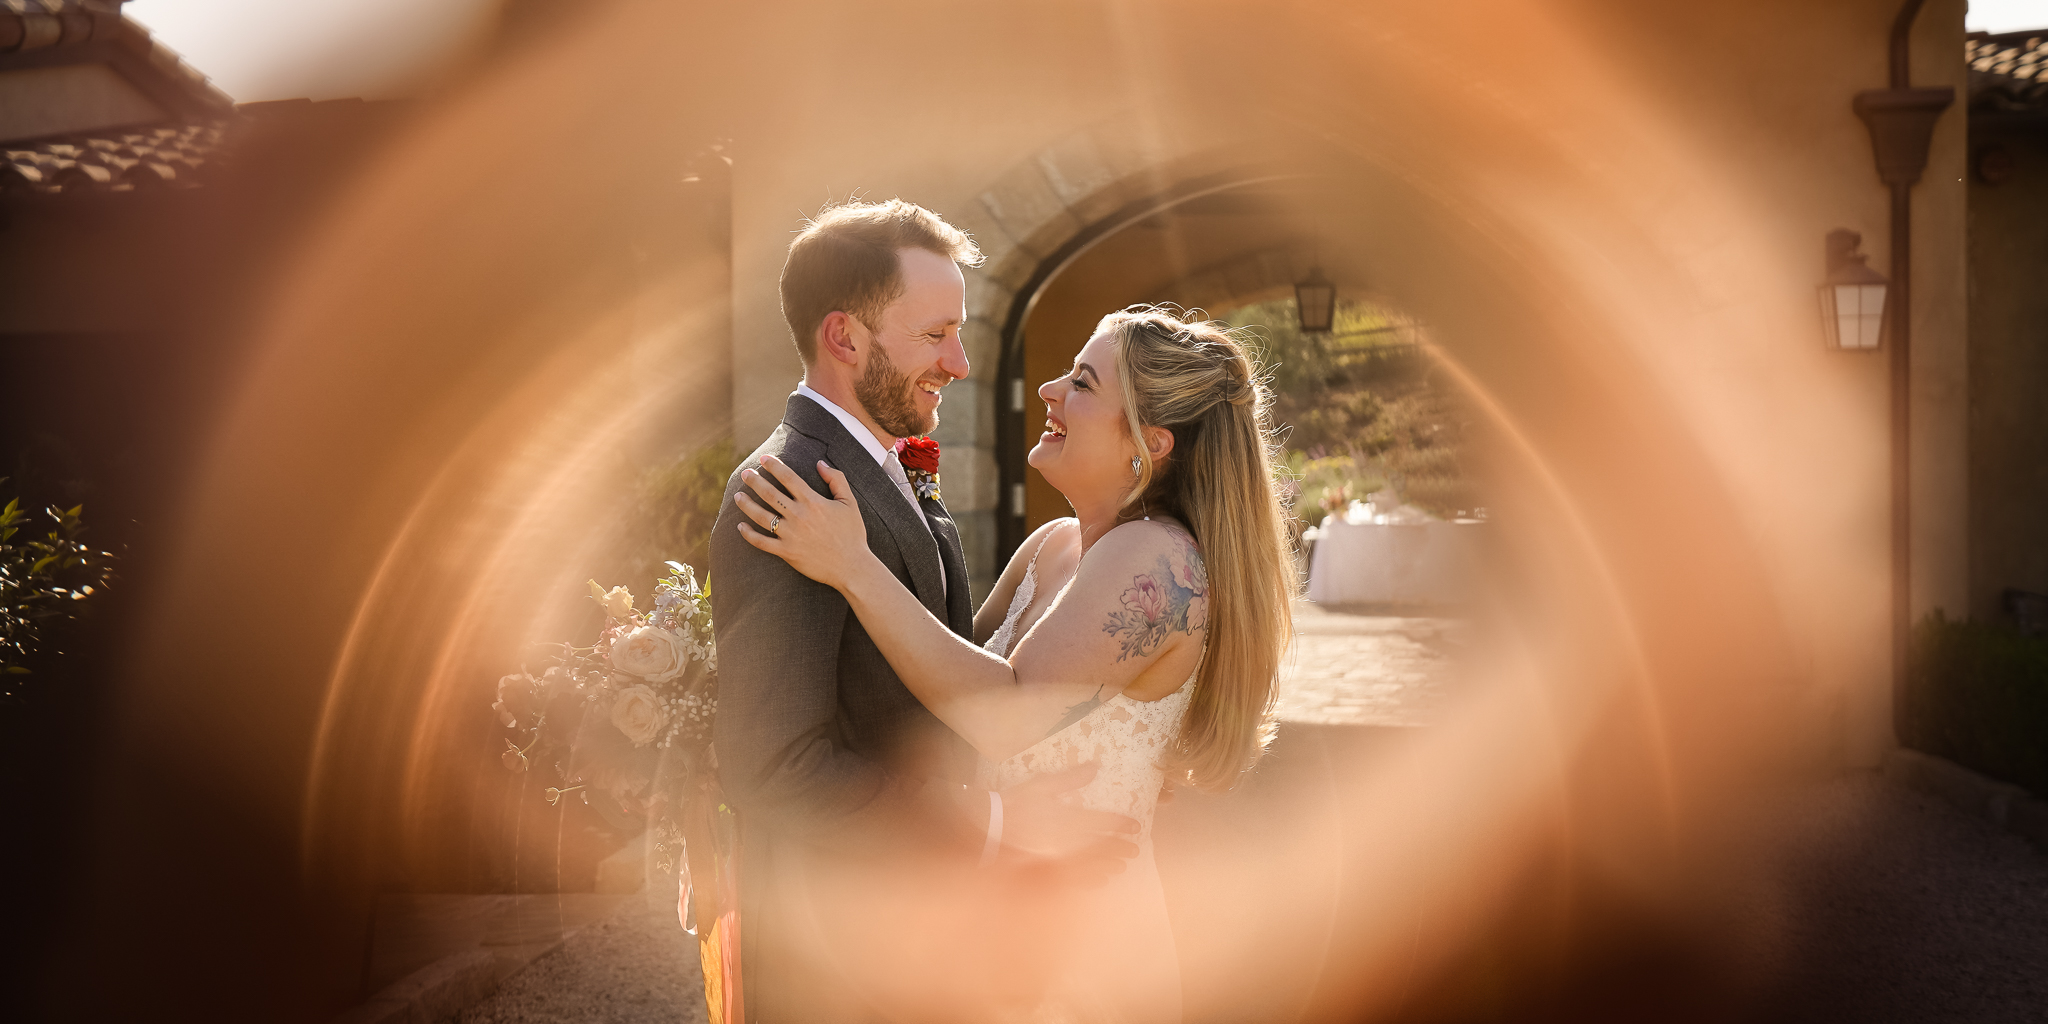 ThomasKim_photography A professional wedding photographer captures the emotional embrace of a bride and groom in front of a circular window.